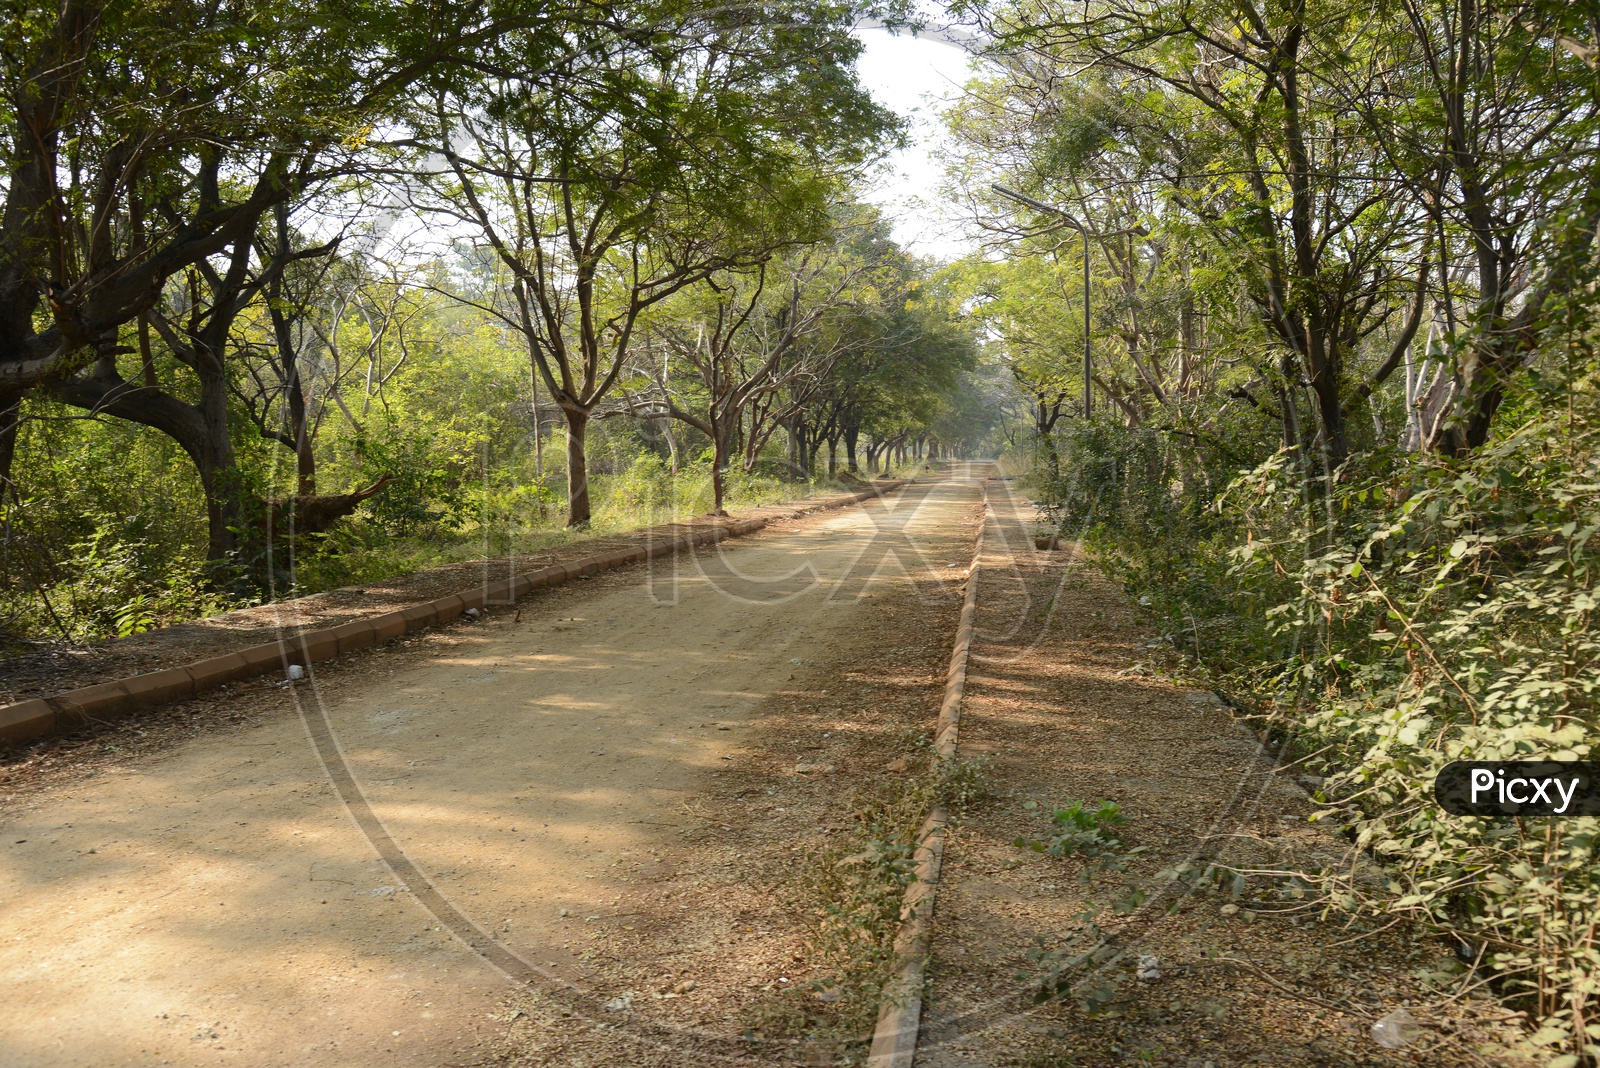 Mud Roads With Trees On Both Sides